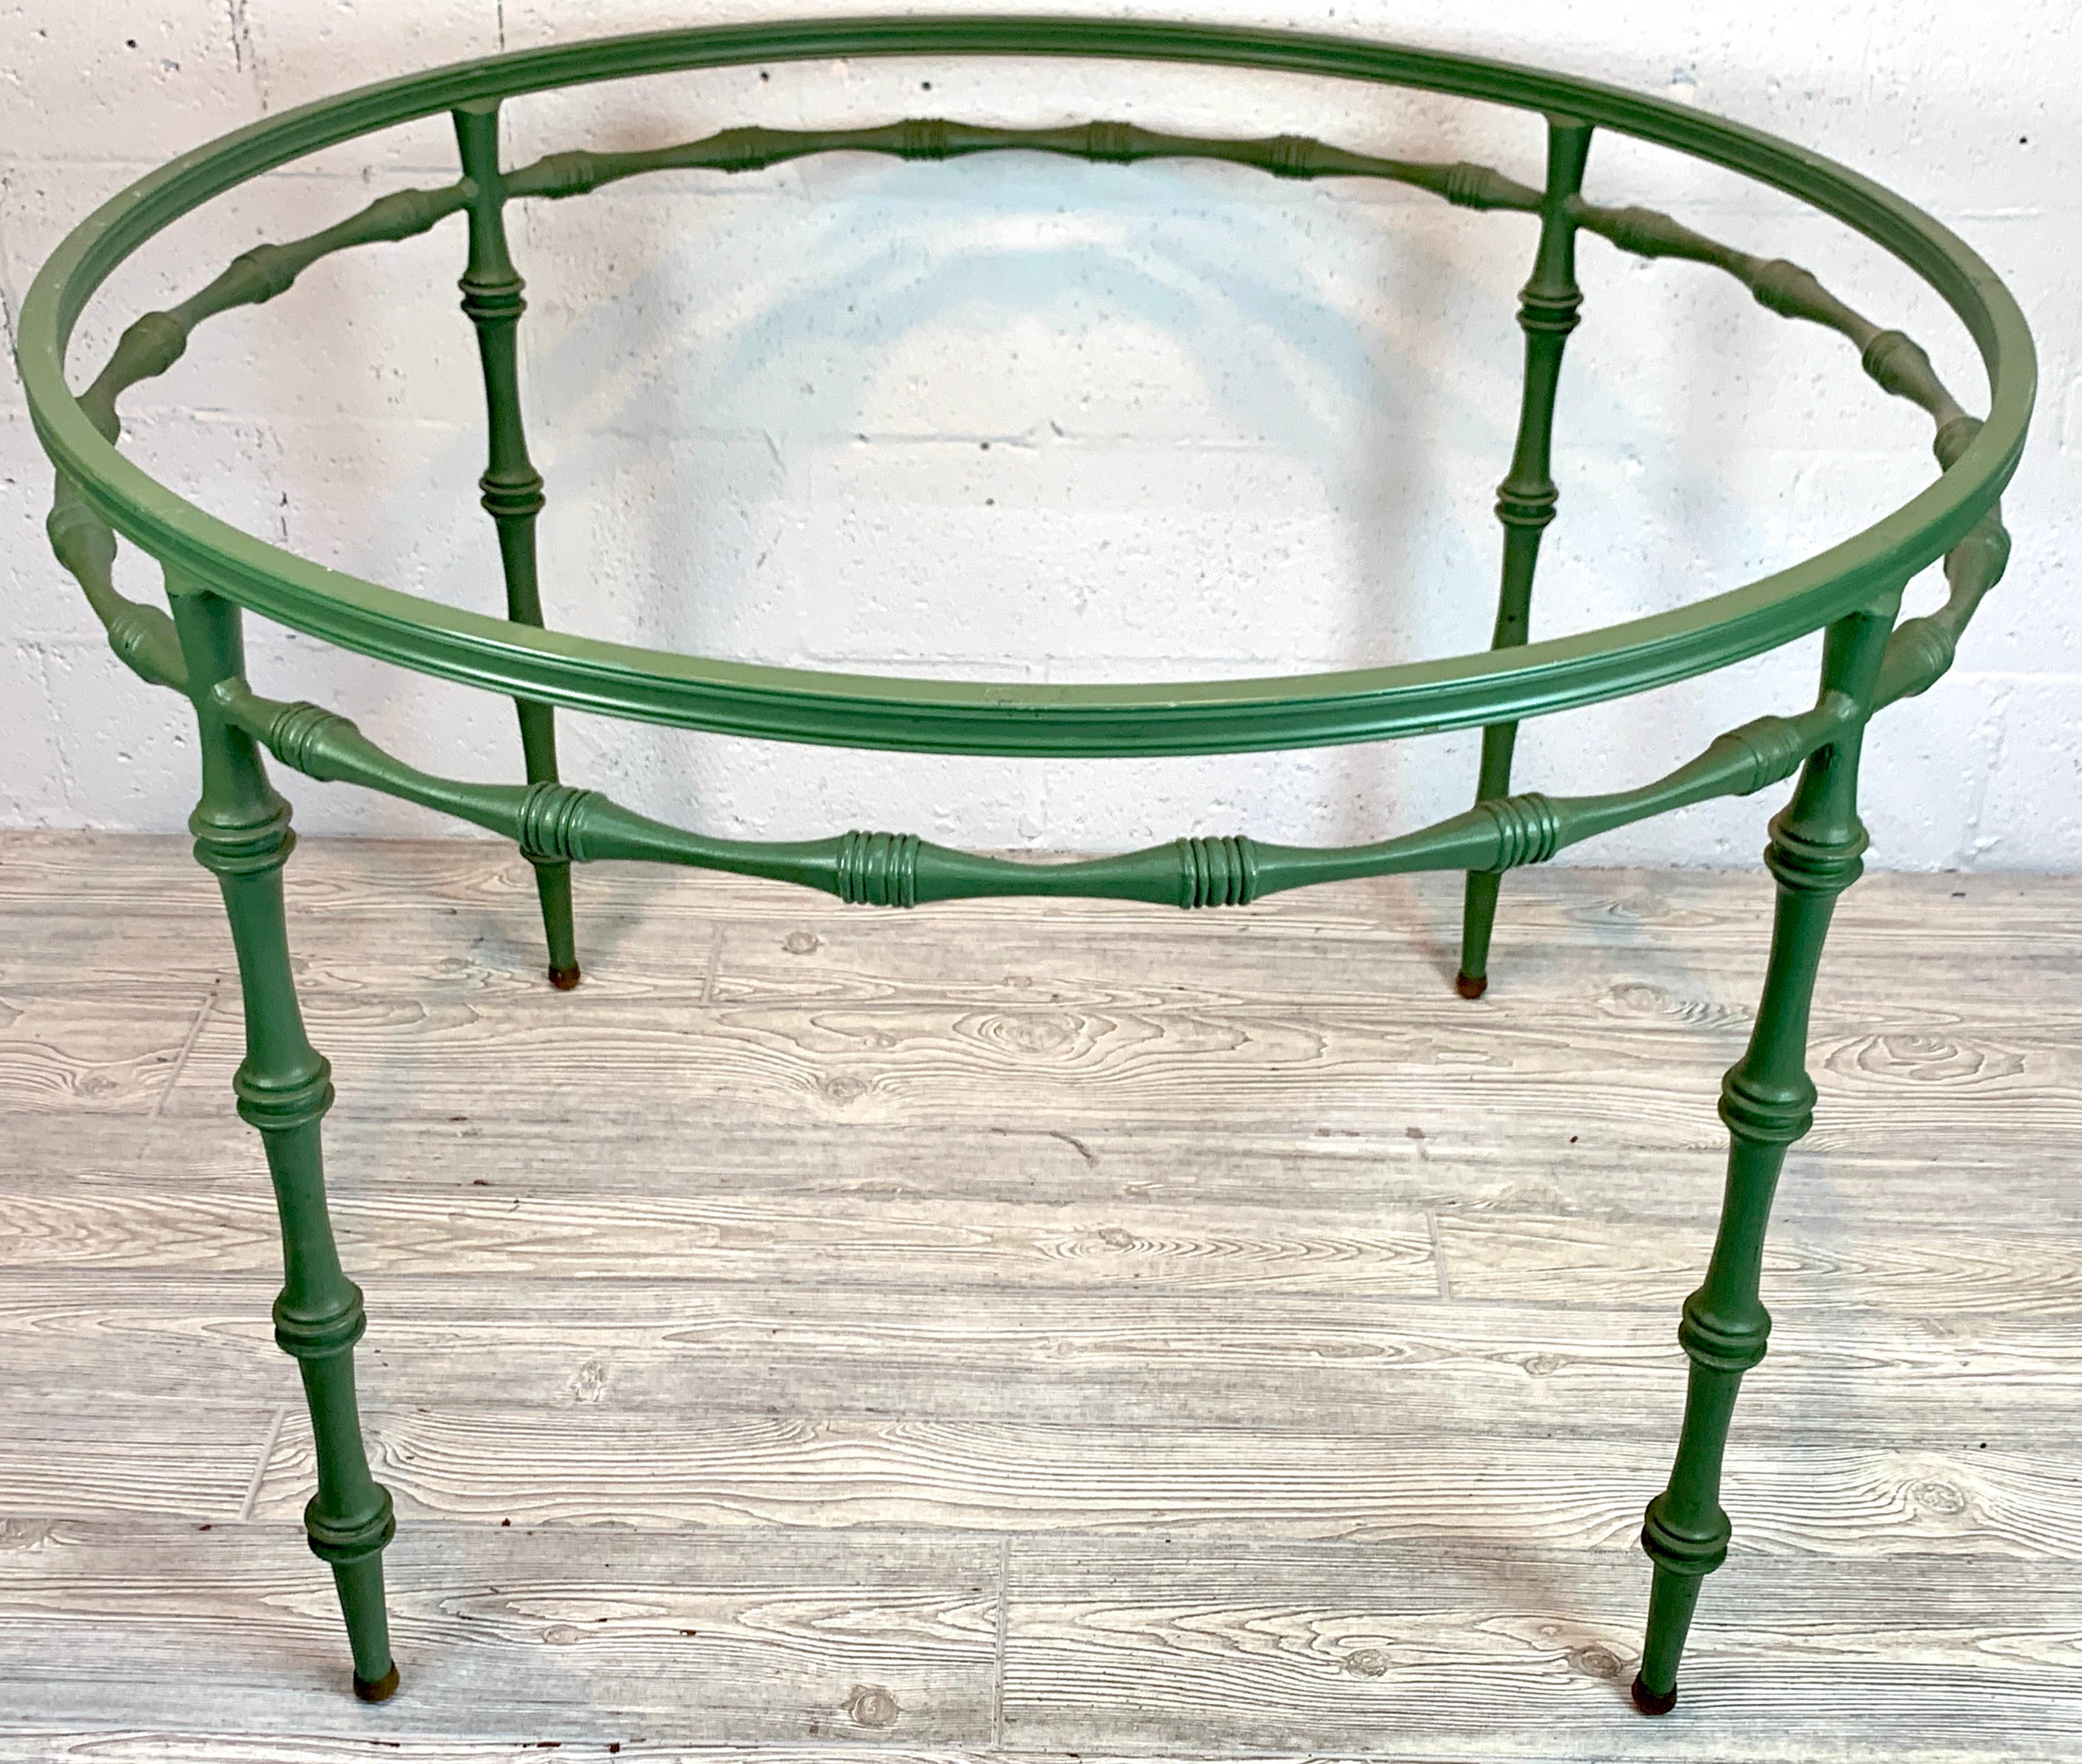 Polychromed Faux Bamboo Center or Dining Table by Phyllis Morris